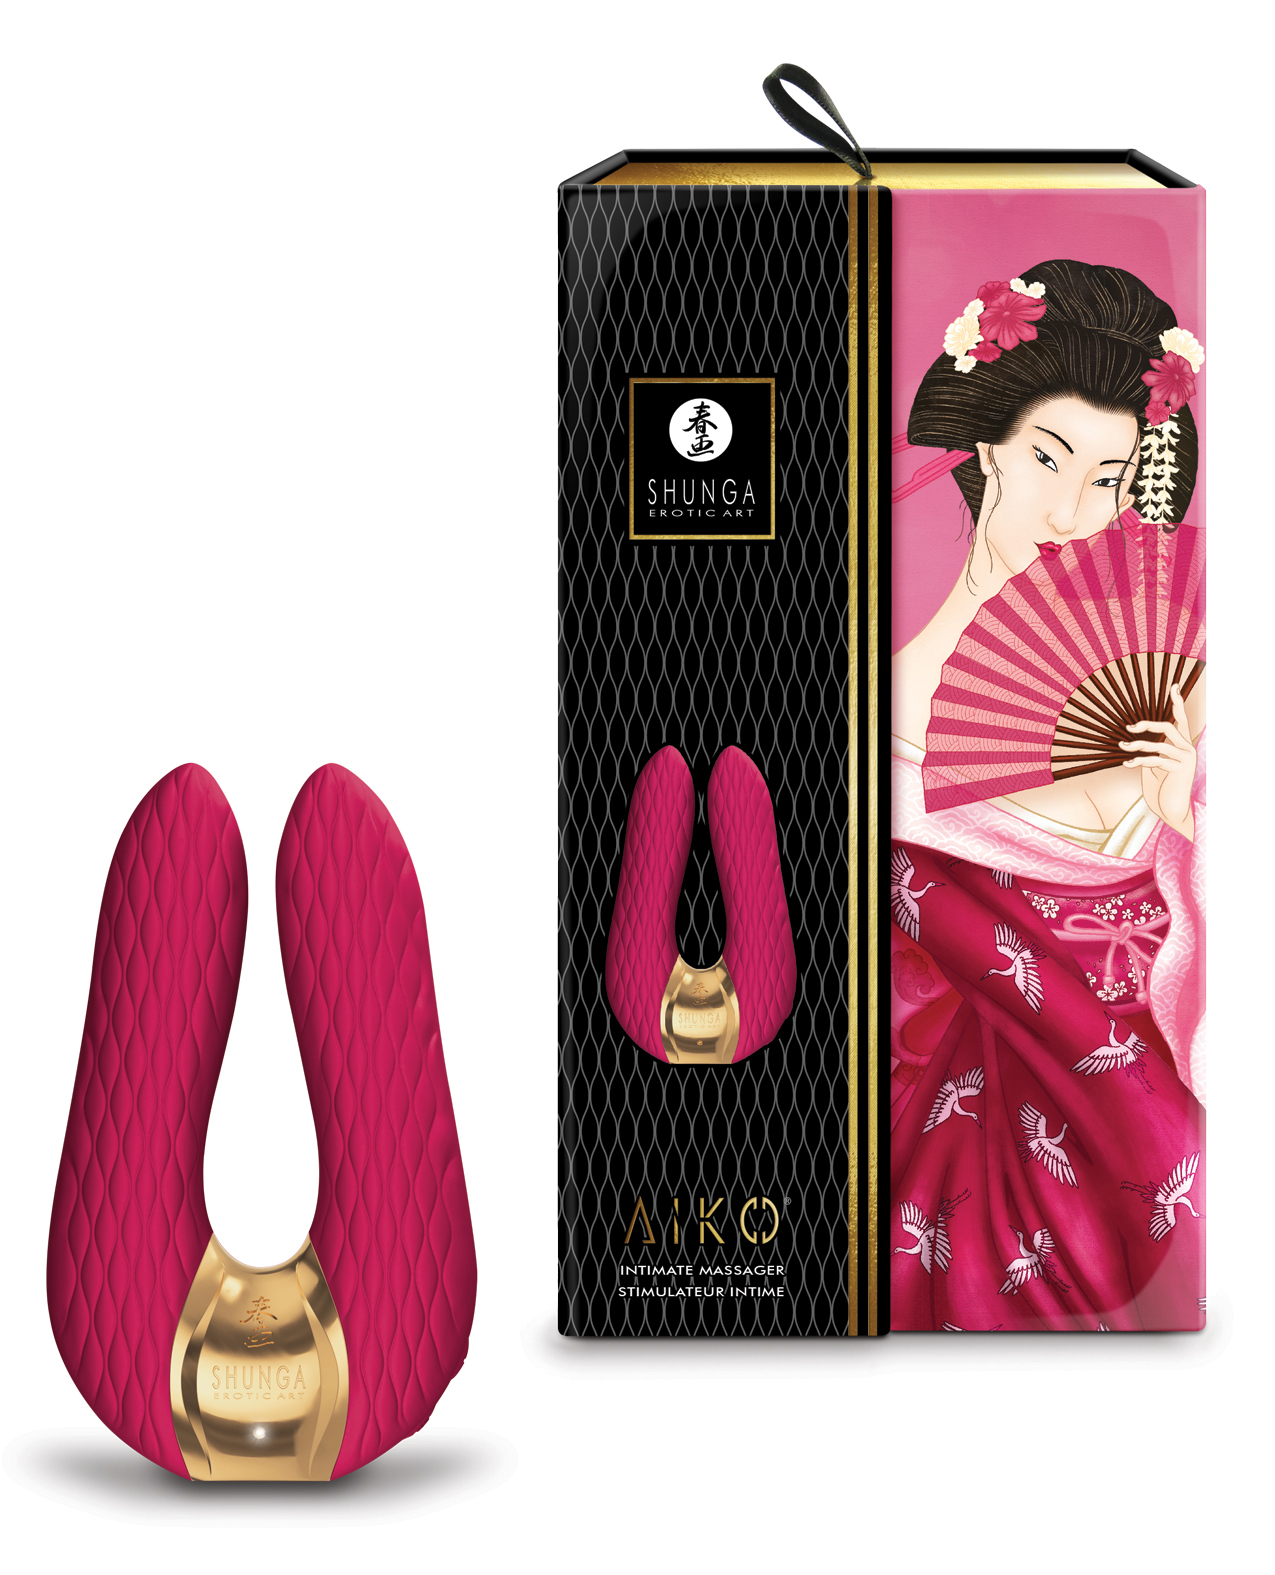 Shunga Aiko sits next to the package which has a image of the toy and a woman using a hand fan